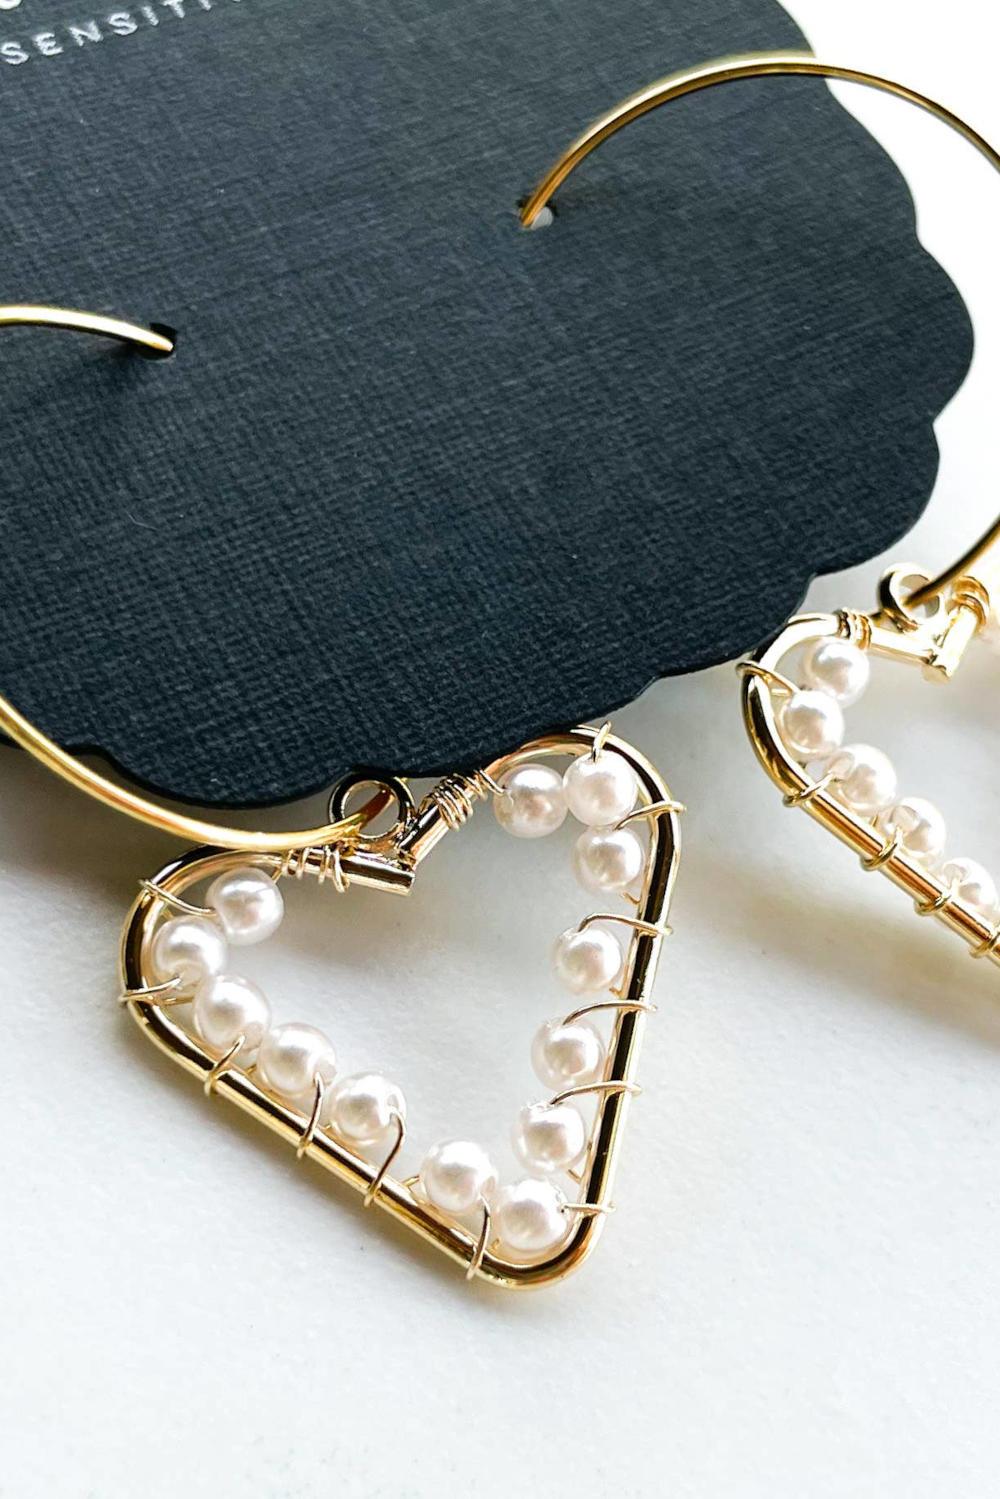 Fanciful Heart Hoops - Strawberry Moon Boutique